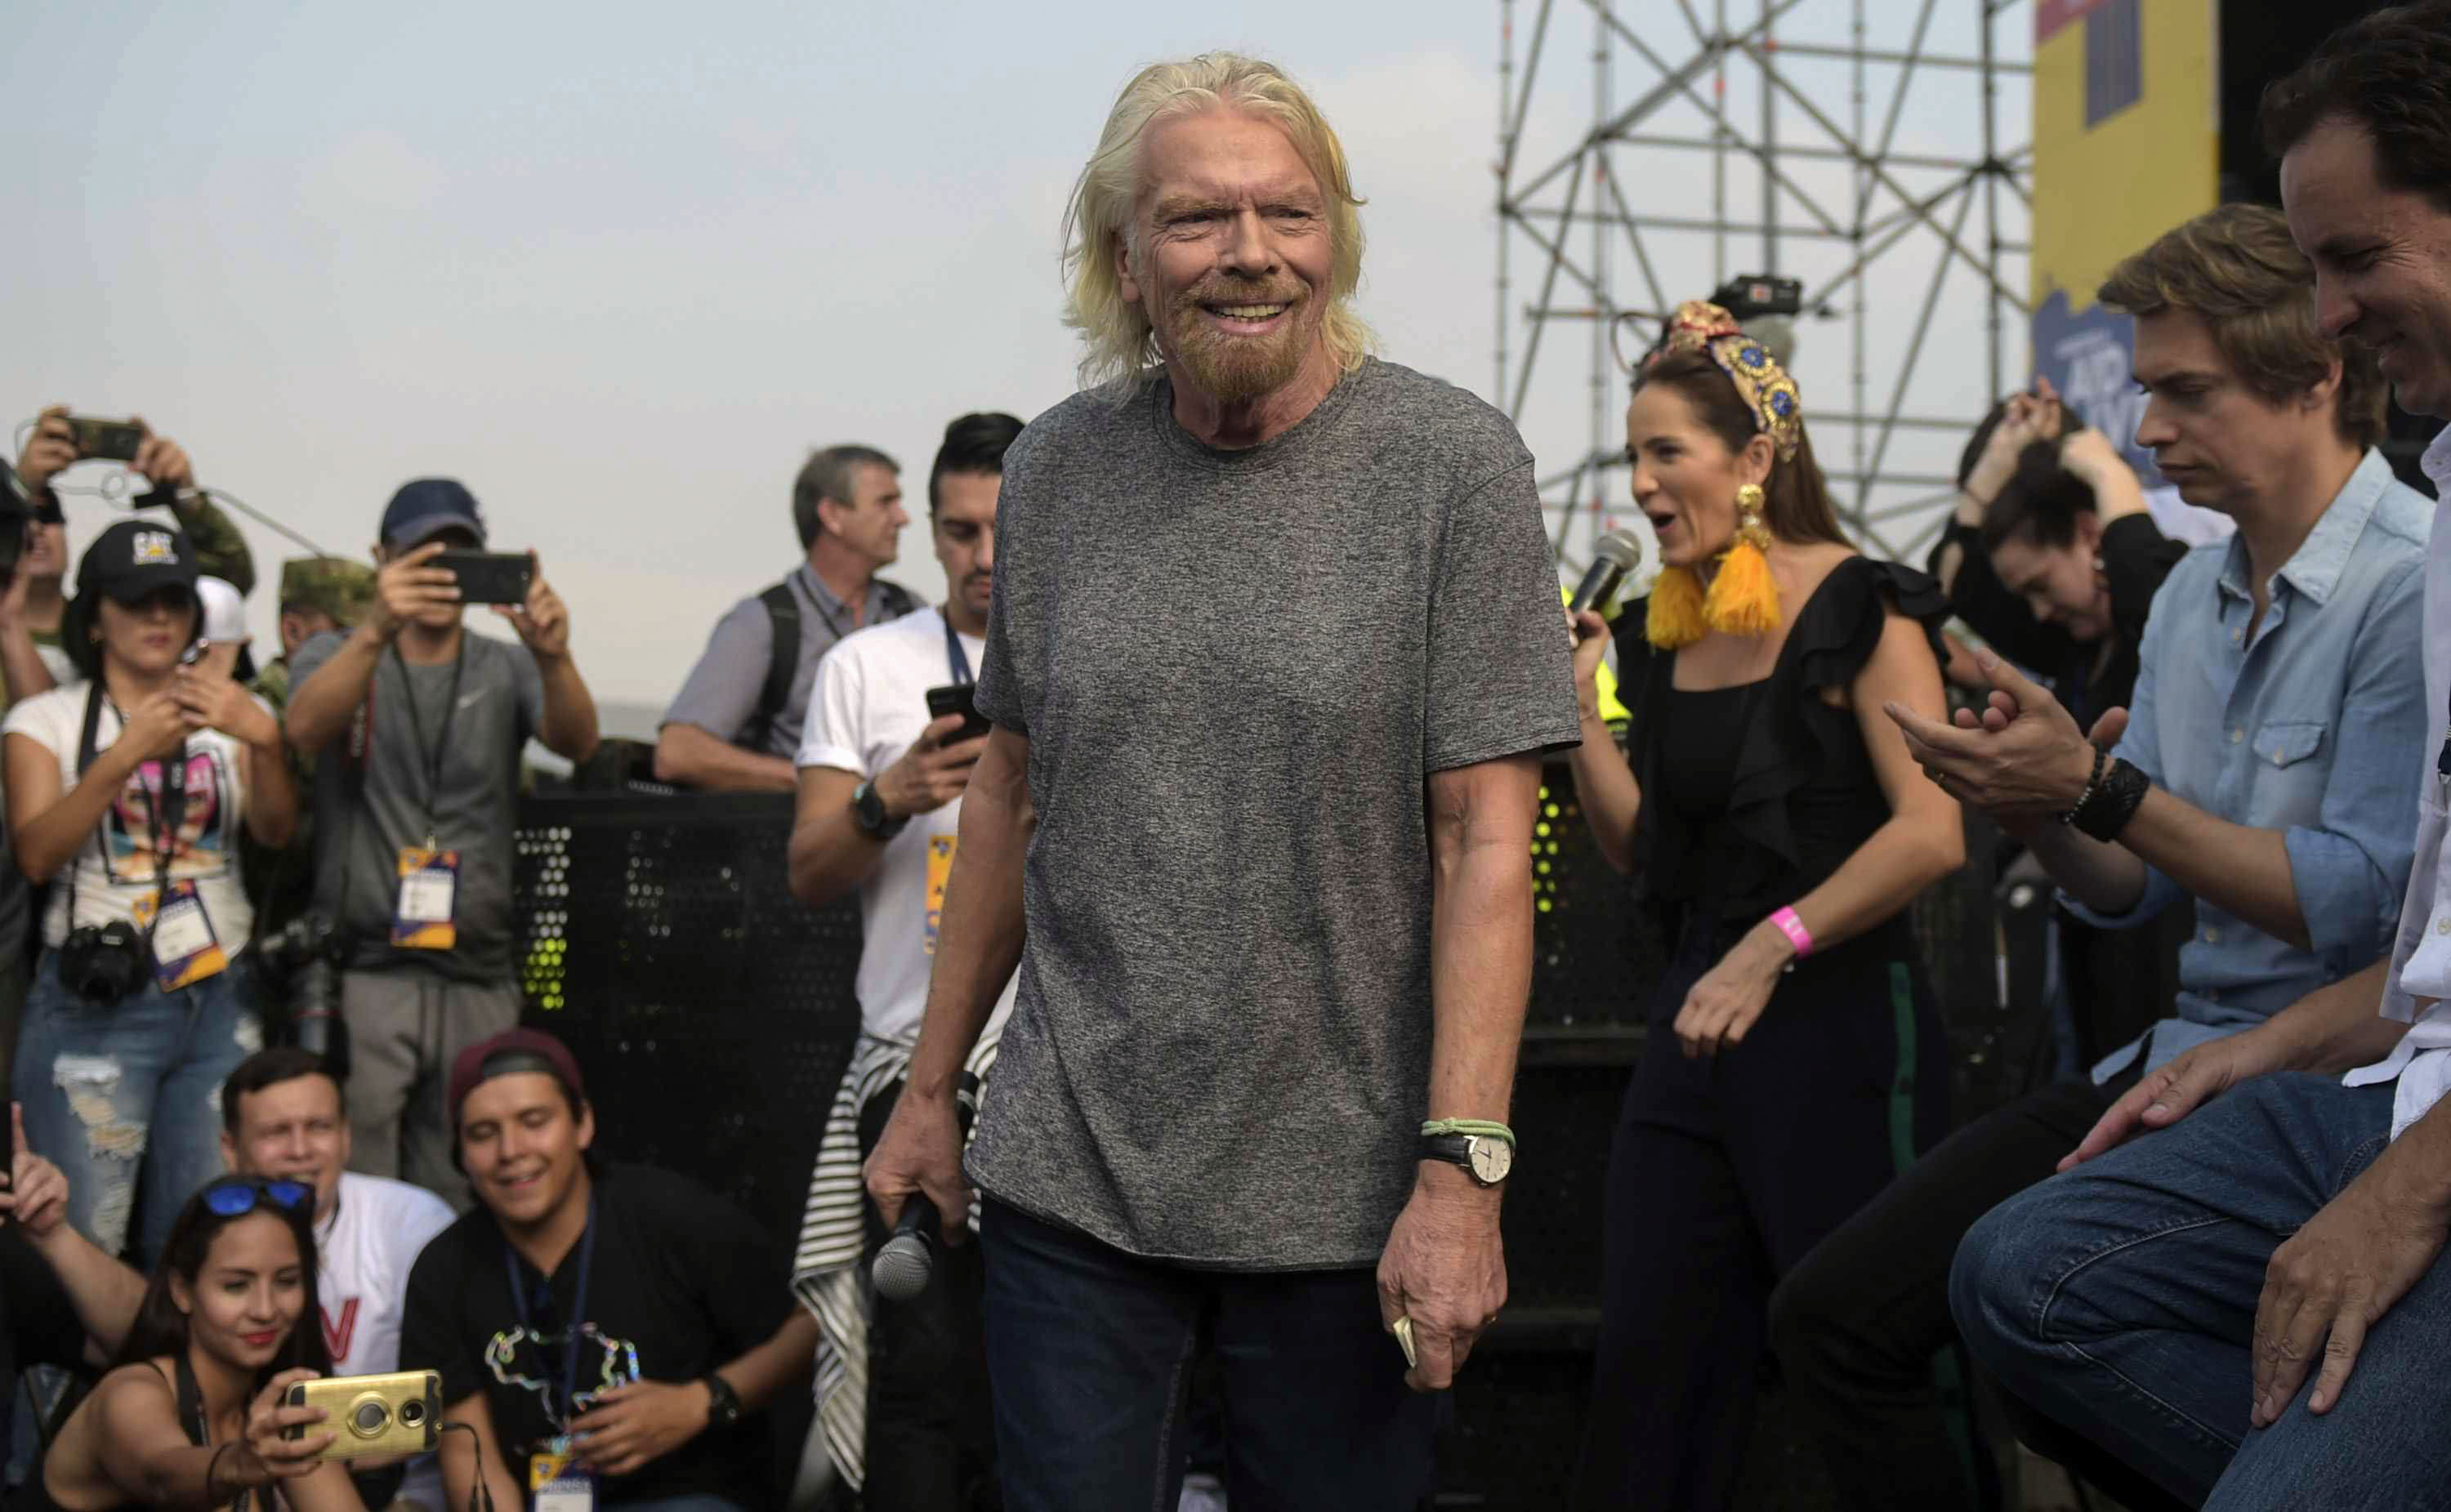 British billionaire Richard Branson (C) is pictured before the "Venezuela Aid Live" concert which he organized to raise money for the Venezuelan relief effort, at Tienditas International Bridge in Cucuta, Colombia, on February 22, 2019. - Venezuela's political tug-of-war morphs into a battle of the bands on Friday, with dueling government and opposition pop concerts ahead of a weekend showdown over the entry of badly needed food and medical aid. (Photo by RAUL ARBOLEDA / AFP) (Photo credit should read RAUL ARBOLEDA/AFP/Getty Images)